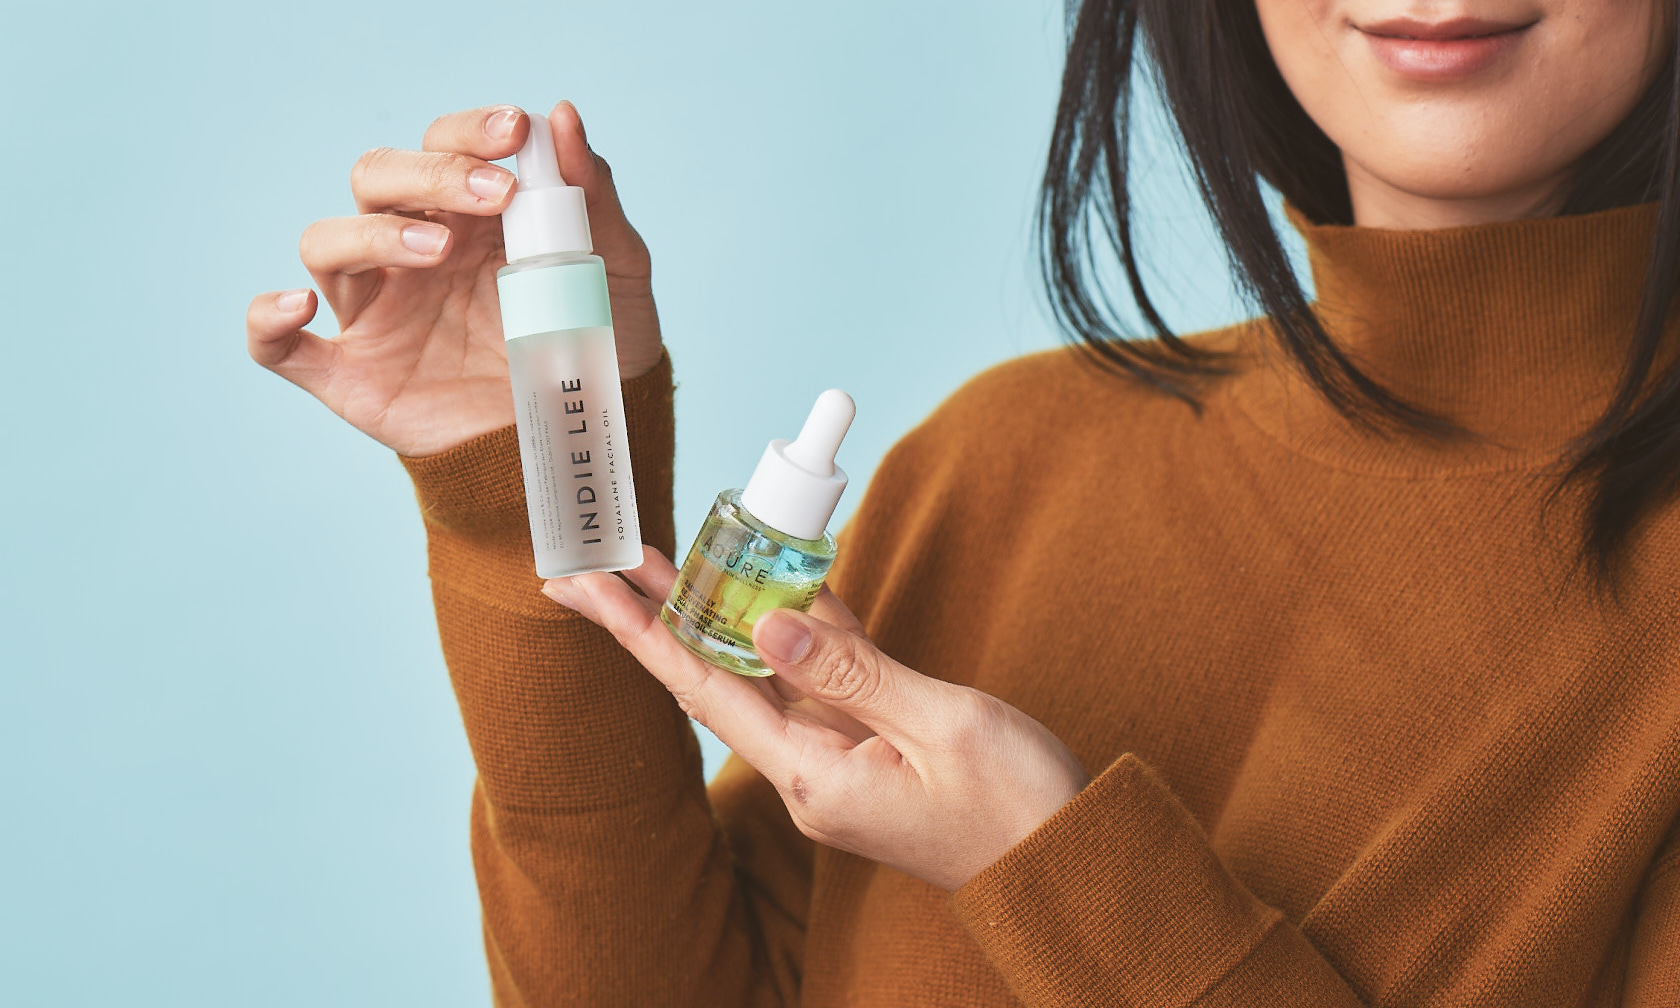 Photo of two skincare serums being held up by woman in orange turtleneck